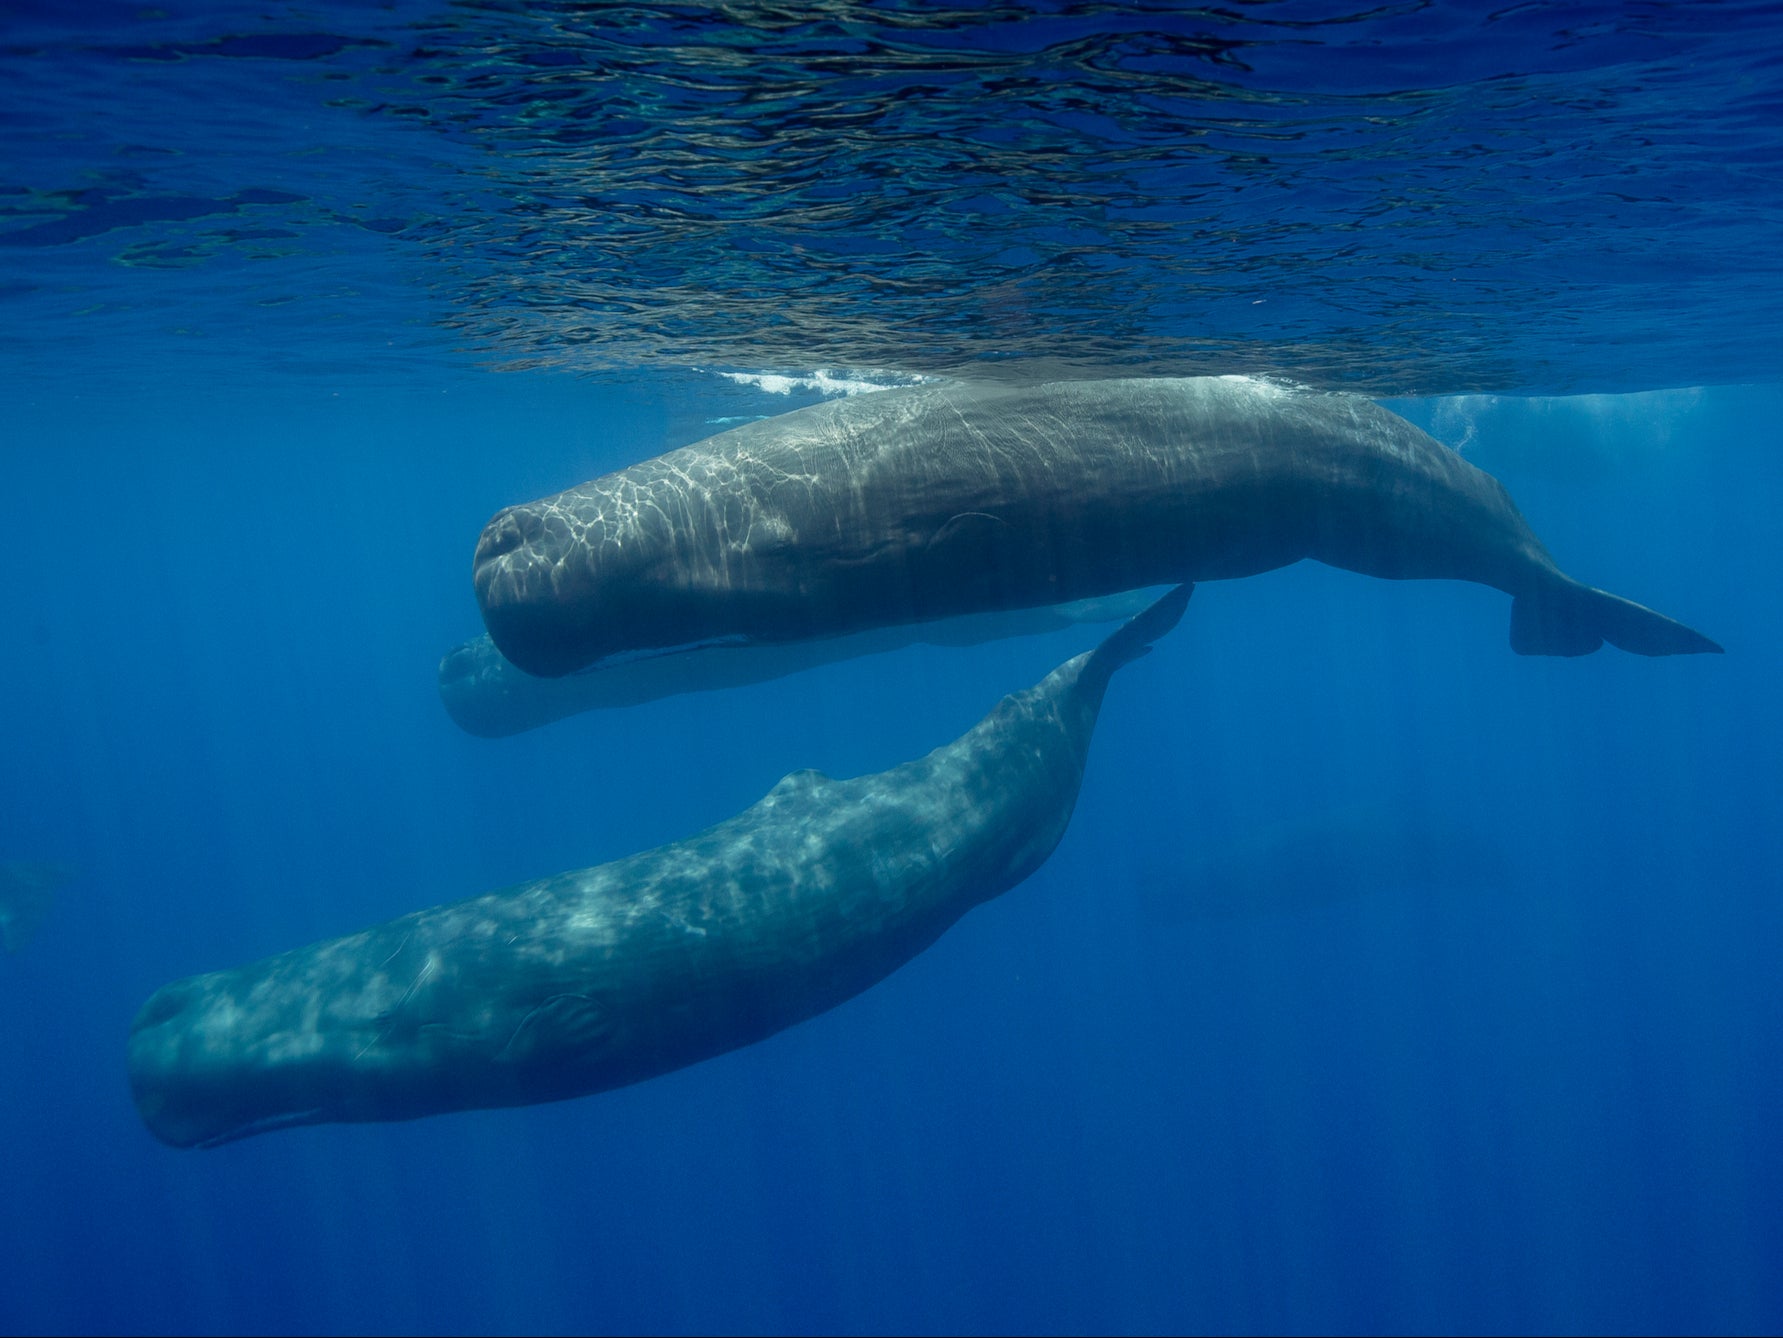 Sperm whales learned to avoid harpoon attacks by teaching one another ‘defensive measures’, a study suggests